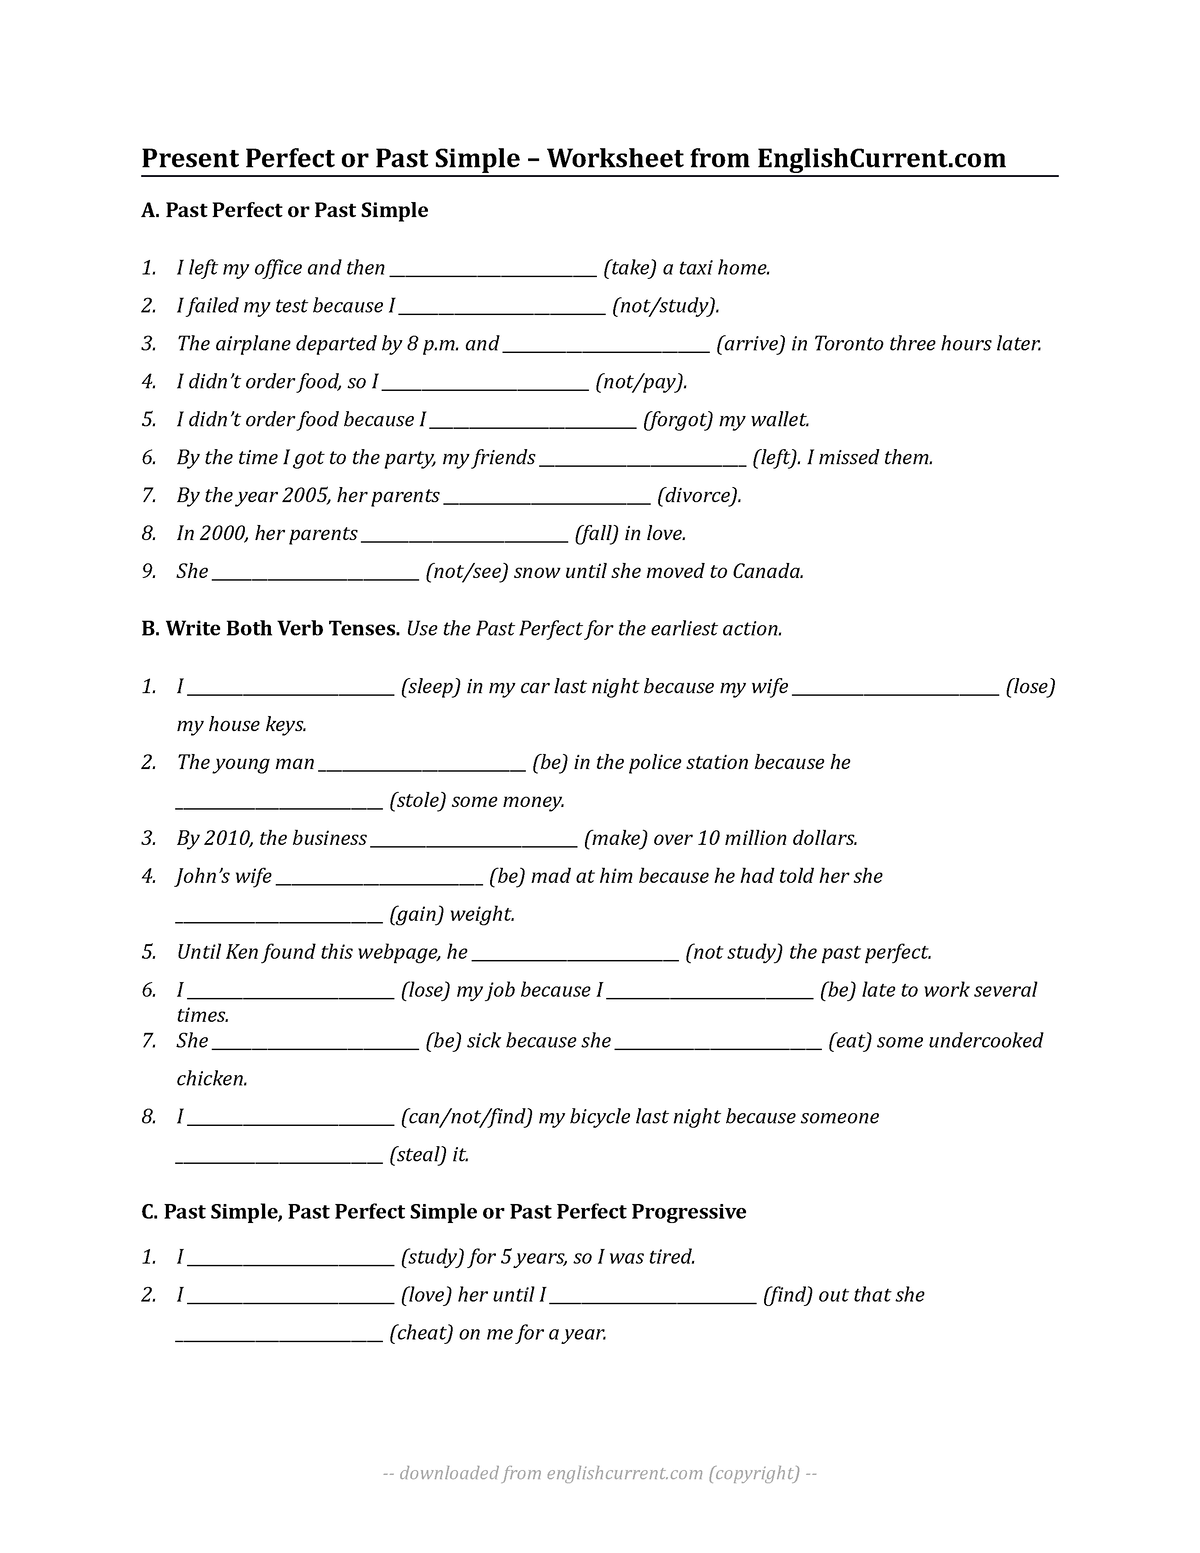 Past-perfect-past-simple-worksheet - Present Perfect or Past Simple ...